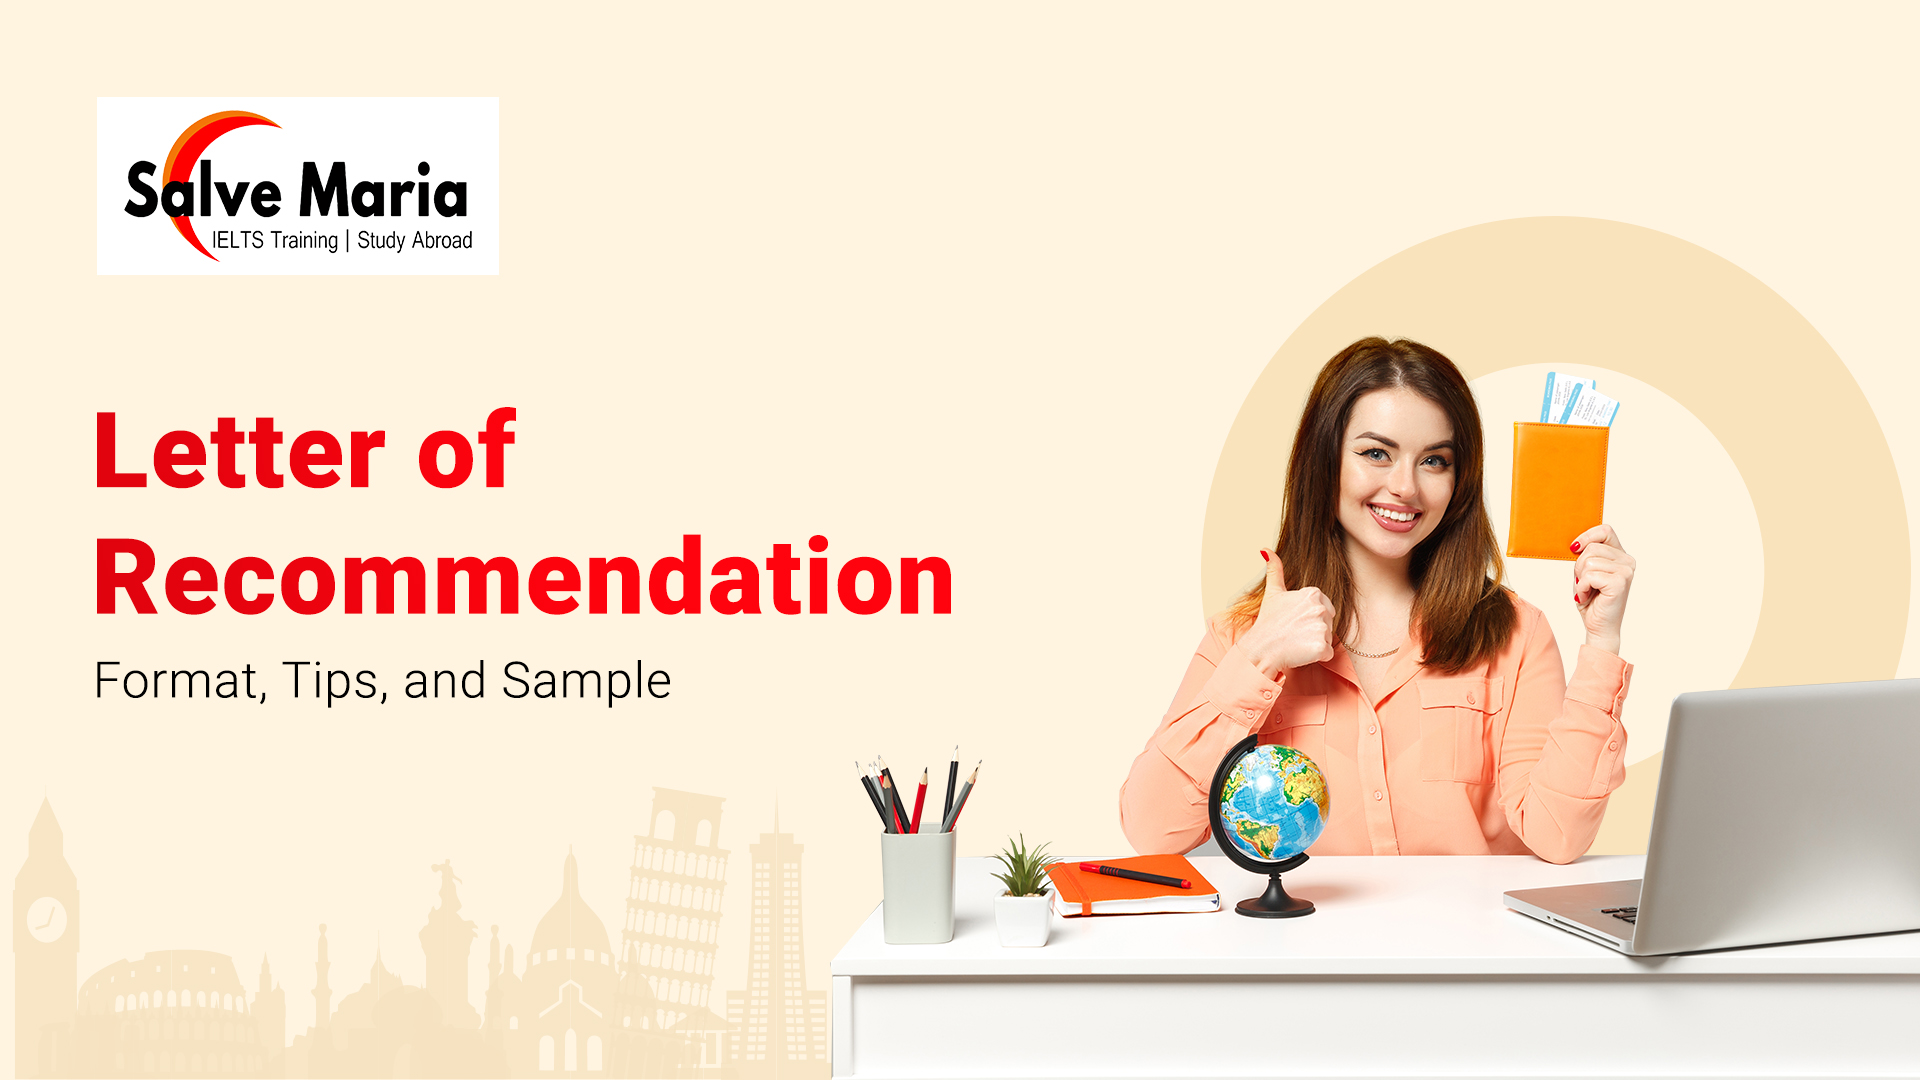 Letter of Recommendation – Format, Tips and Sample